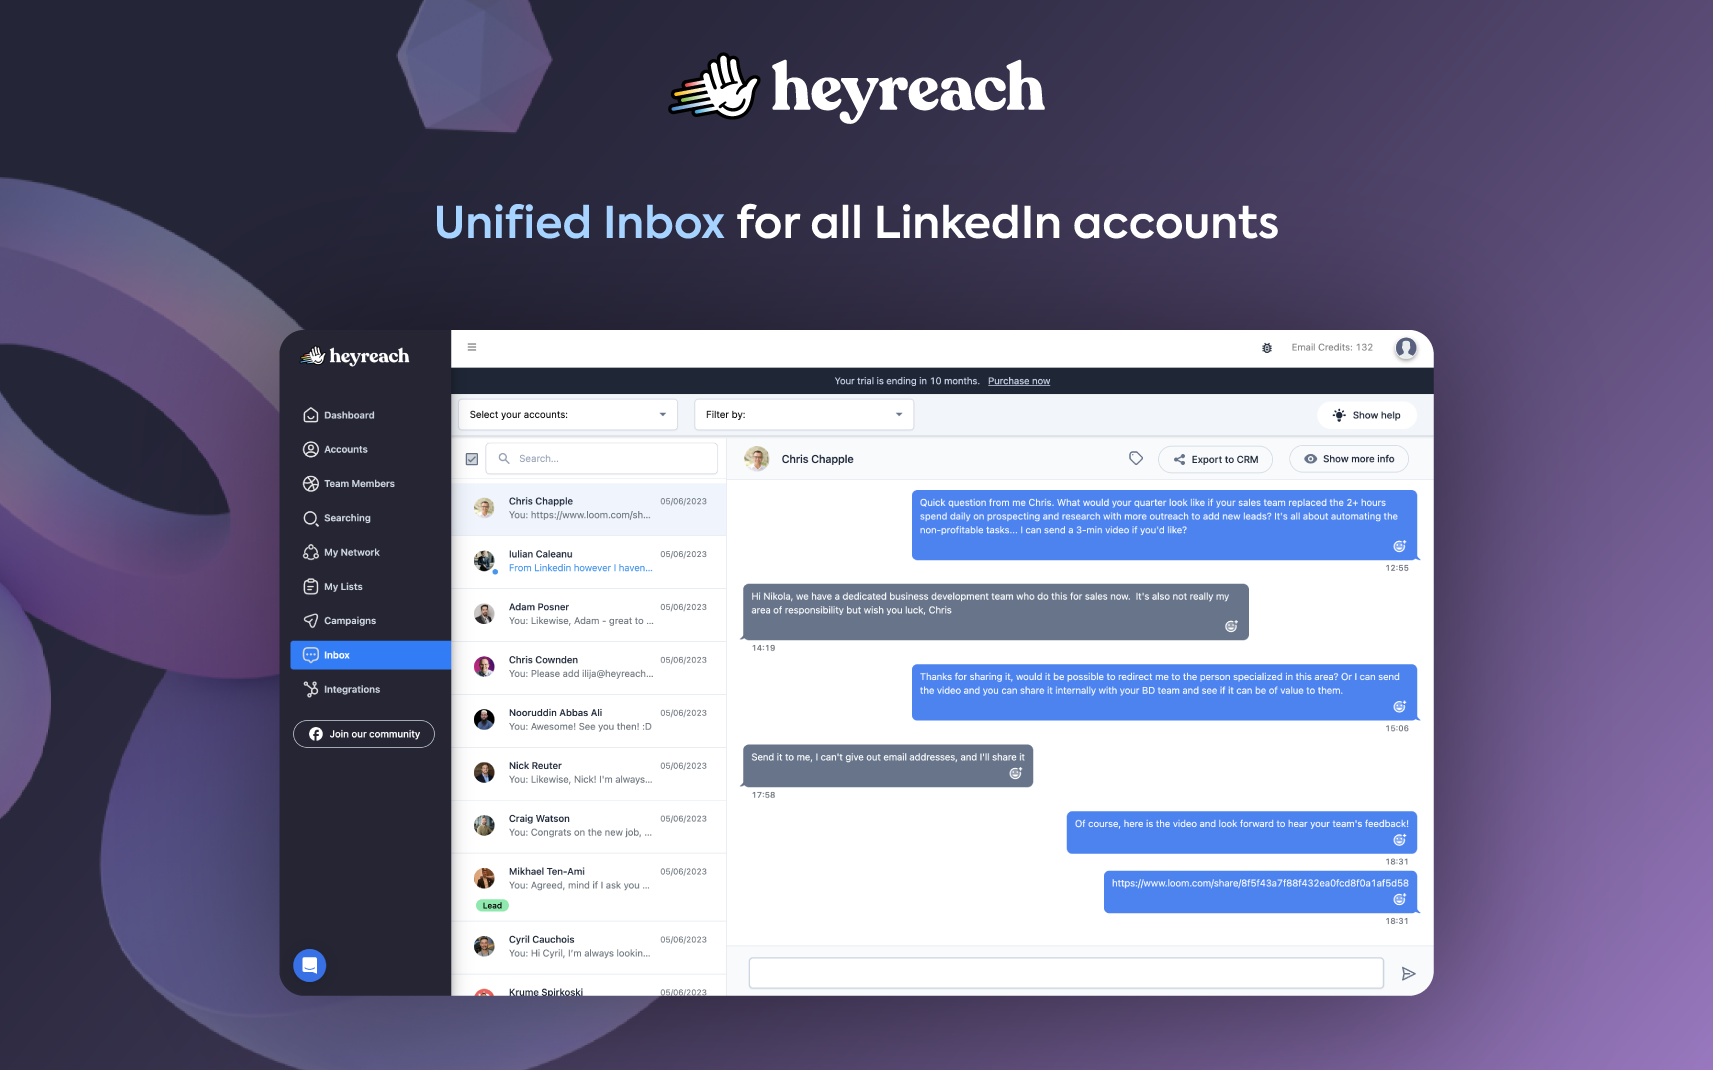 All LinkedIn accounts inboxes in one hub. Handle all conversations with the ability to chat with the prospects in one chat area, filter conversations by an account/s, by campaign/s, or tag/s. Send prospects from HeyReach’s inbox to HubSpot or Pipedrive